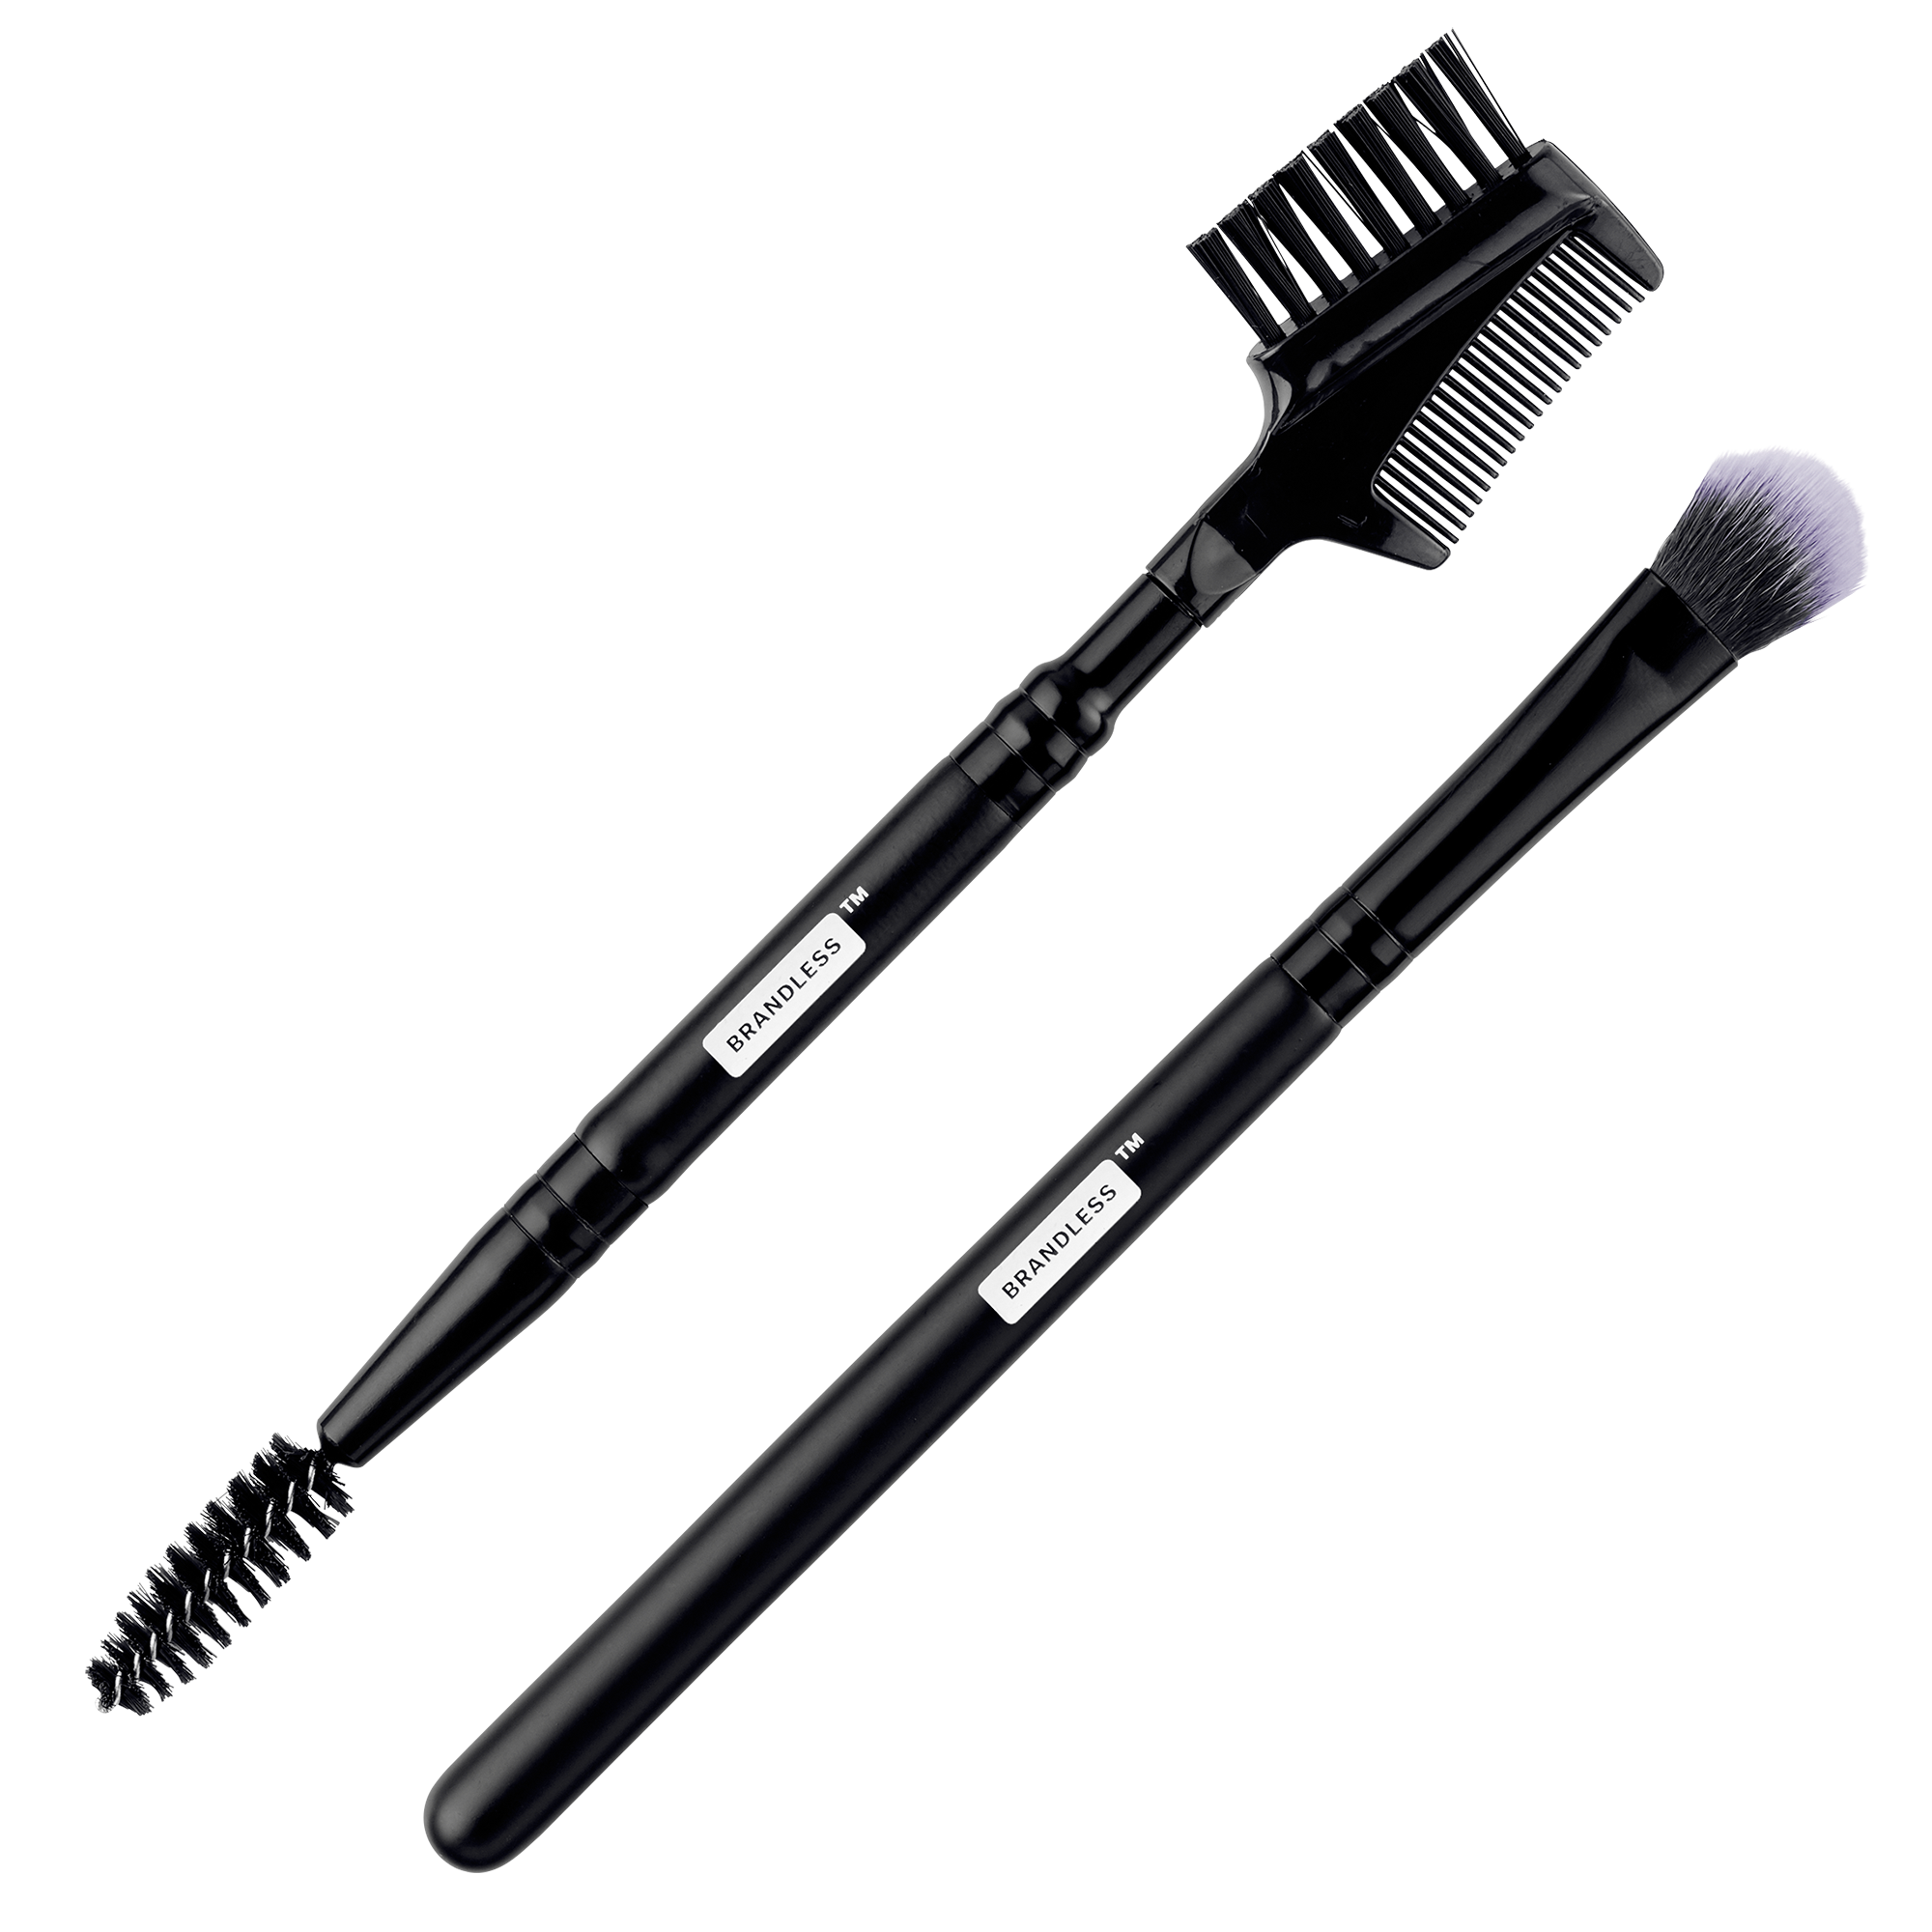 Top view, eye and brow brush set.  Brush one is a fine detail eyeshaddow brush. The other tool has a comb, an eyelash curler, and a stiff-bristle raking brush.